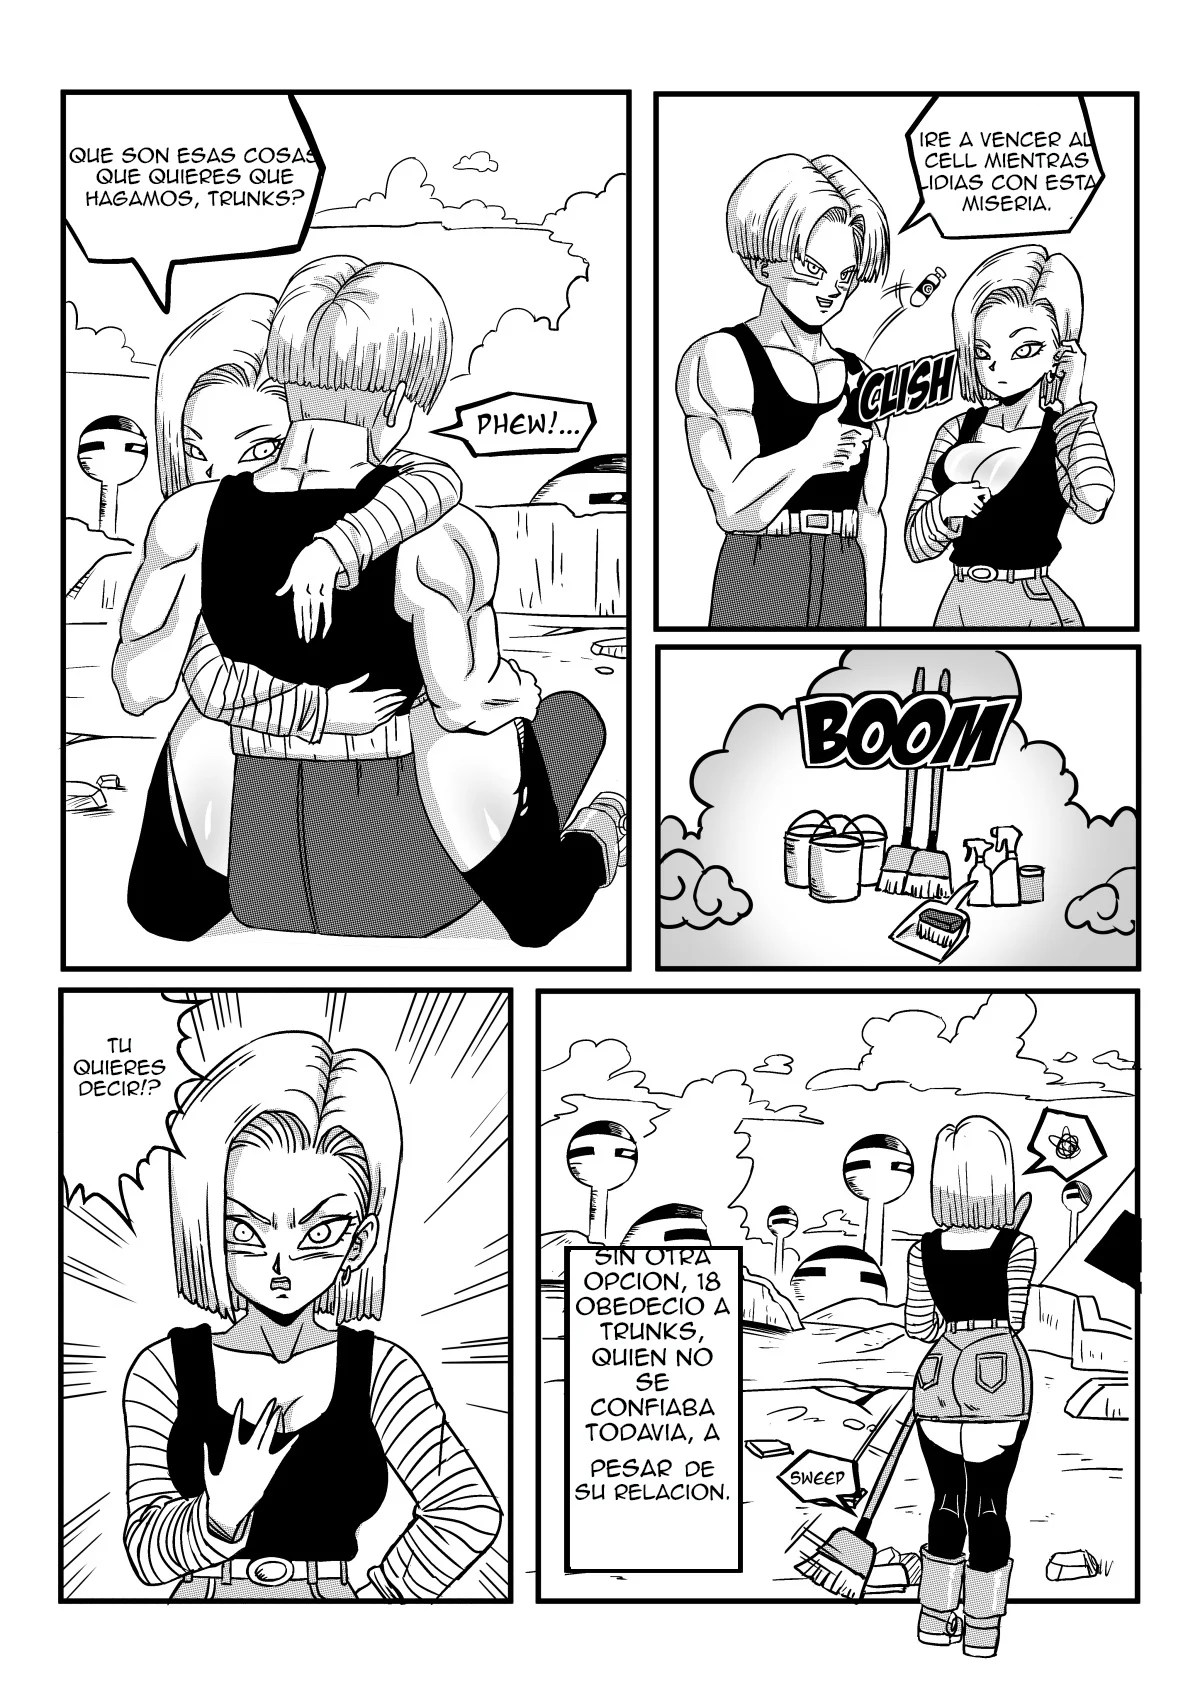 Android 18 Stays in the Future – Pink Pawg - 3ee4fe8e8d0c27d3a06206f2b91425b1